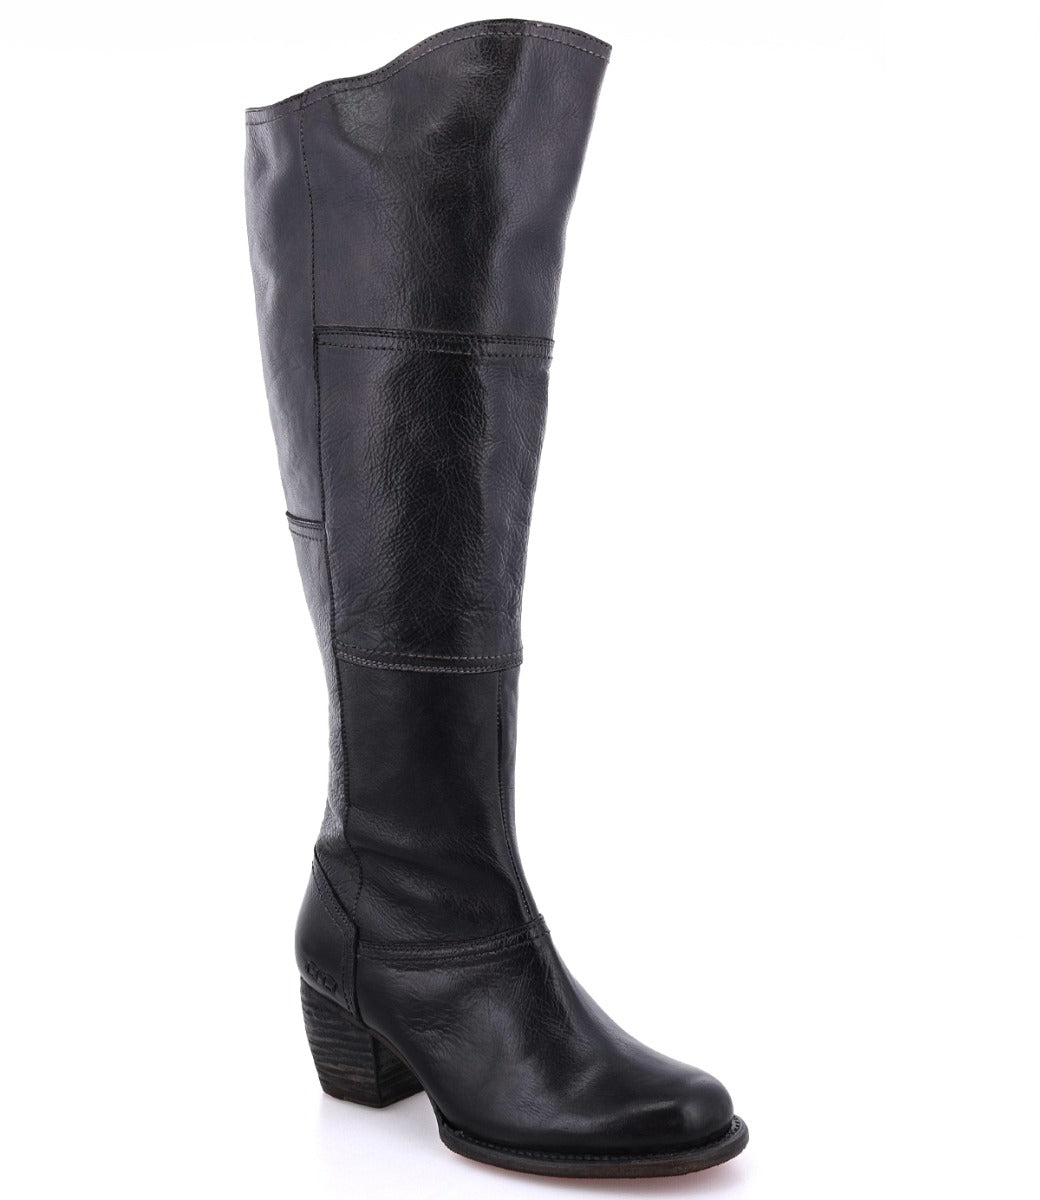 A women's Kennice black leather boot by Bed Stu.